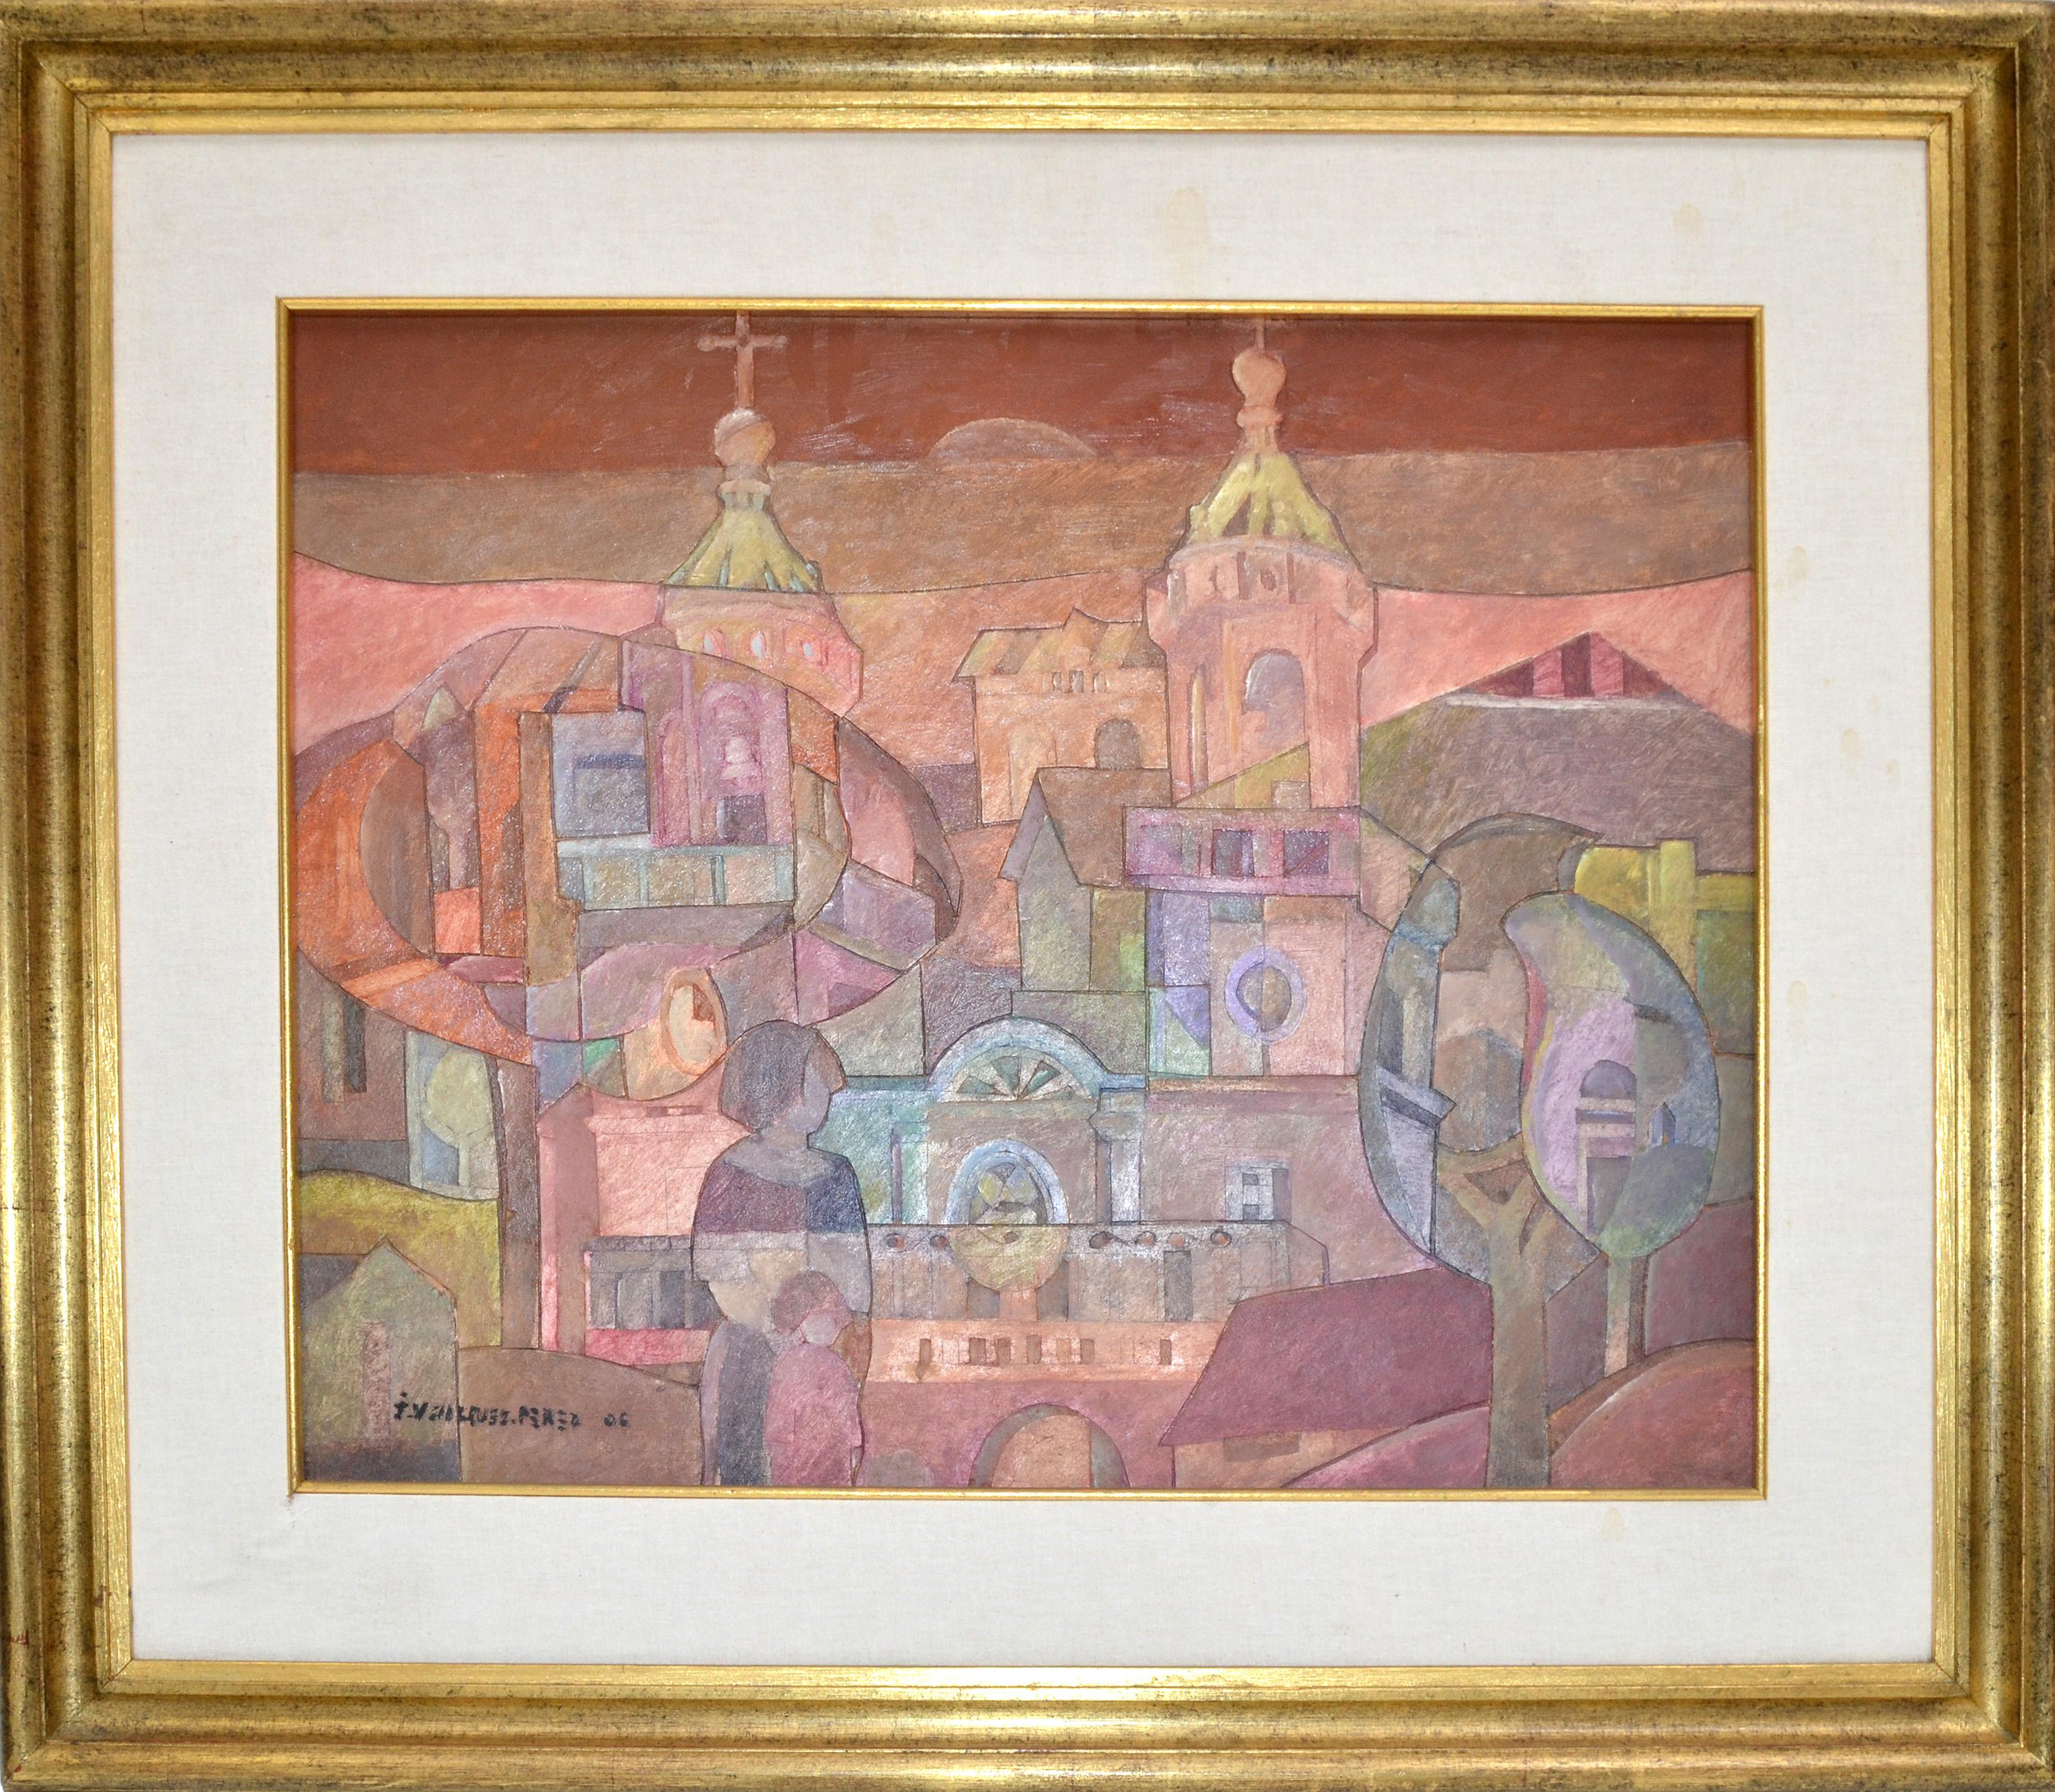 Contemporary Fine Art by well-known South American Artist Cityscape painting, wall art. 
Signed and dated by the Artist, made in 2006.
Comes with a golden wood frame. 
Art work size: 19 x 15 inches.